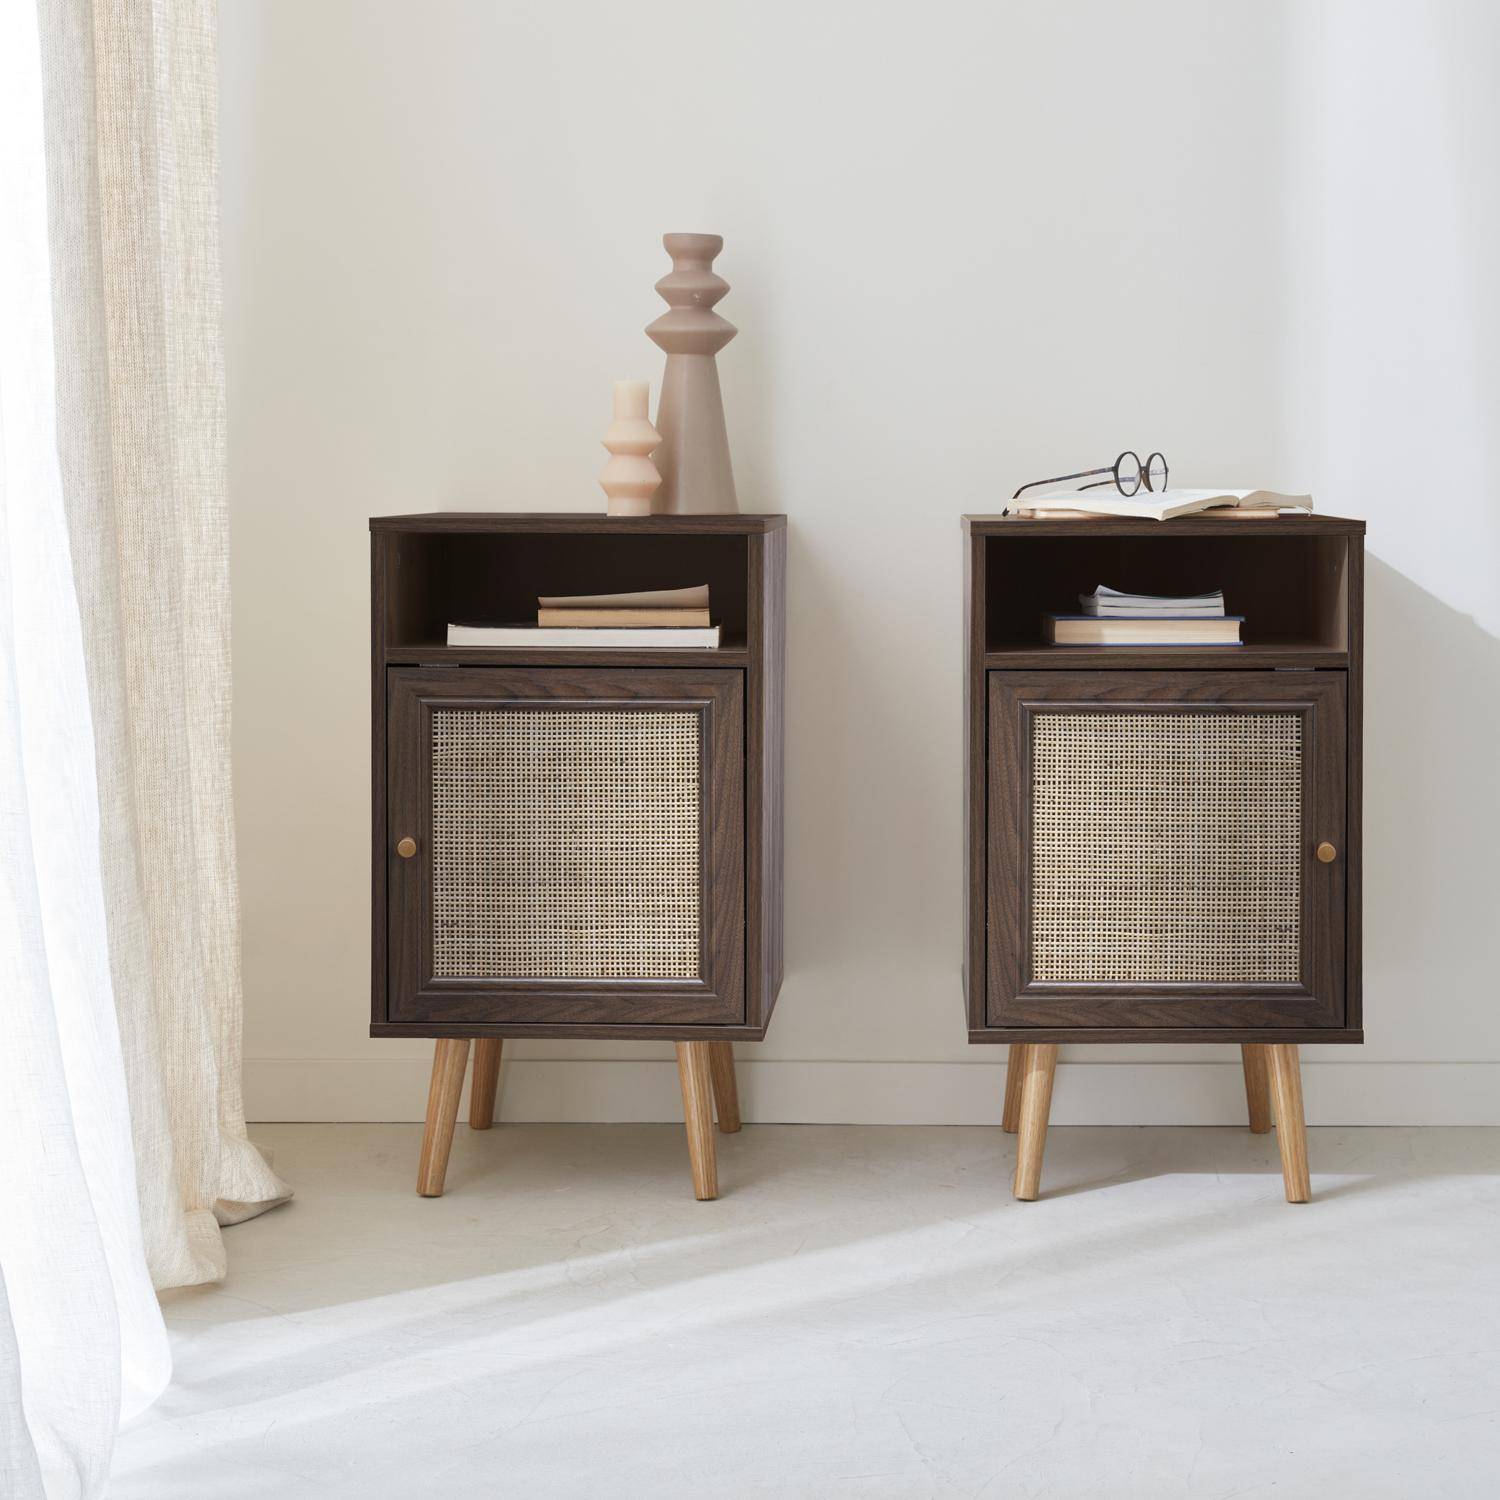 Pair of Scandi-style wood and cane rattan bedside tables with cupboard, 40x39x70cm - Boheme - Dark Wood colour Photo2